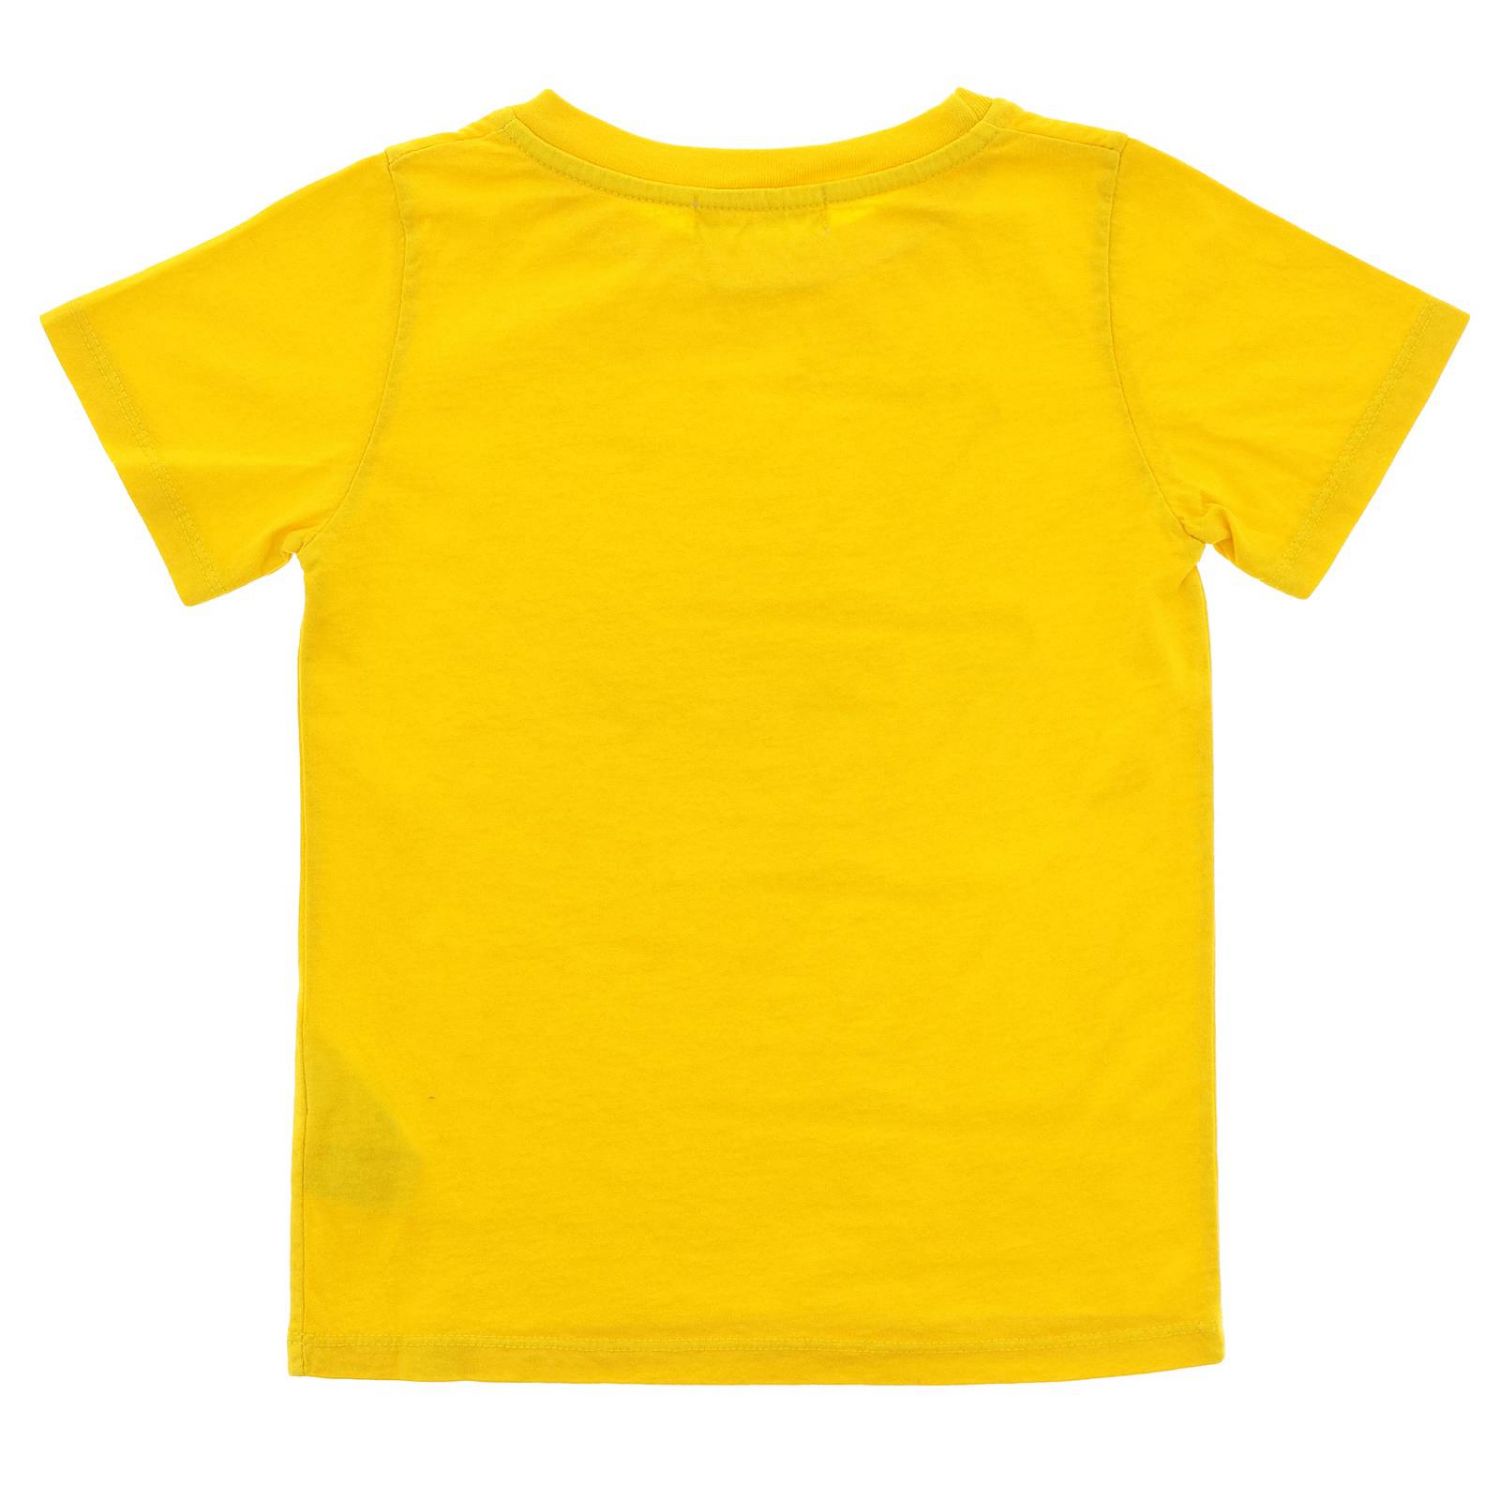 Roy Rogers Outlet: T-shirt kids | T-Shirt Roy Rogers Kids Yellow | T ...